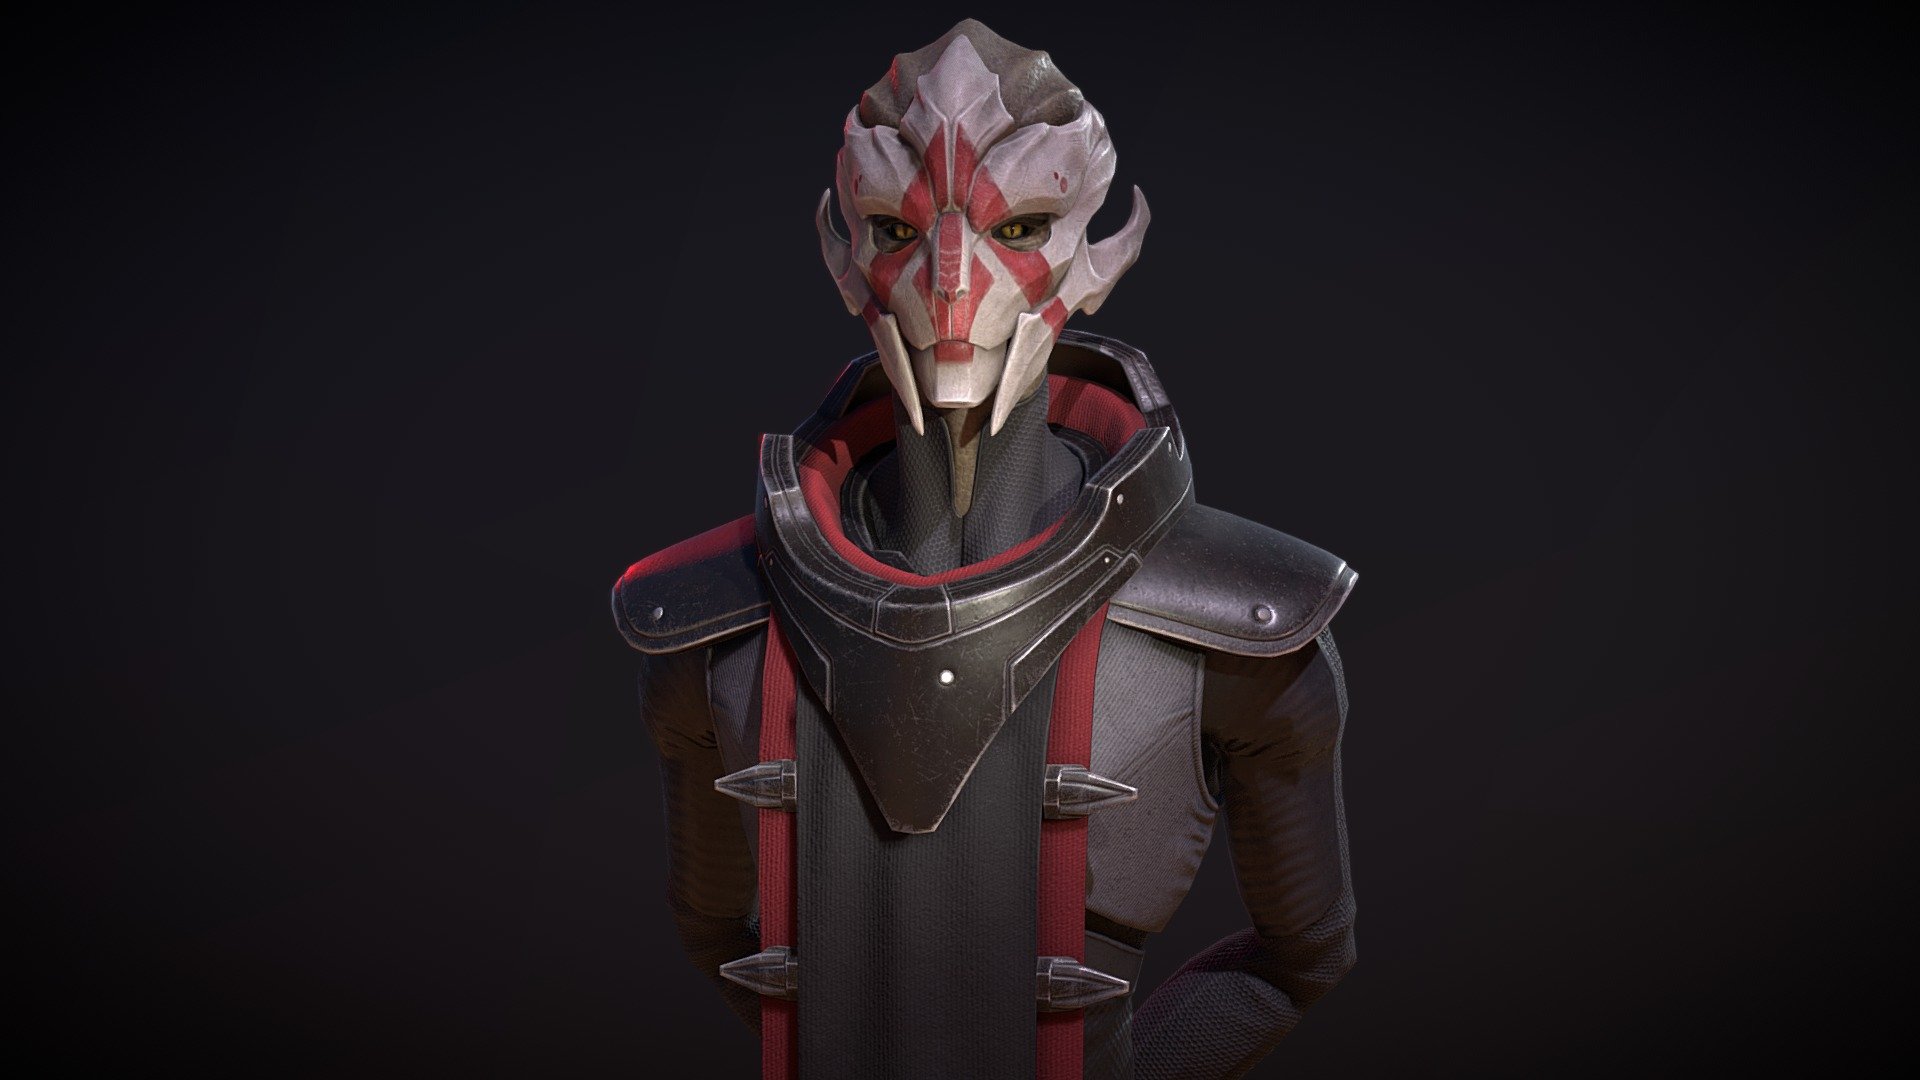 https://www.artstation.com/artwork/v2Ooza
Just a little Mass Effect and Star Wars crossover to celebrate my love for both! Originally this was gonna be a small Turian speedsculpt, which turned into Nyreen fan art, and then pivoted towards creating my own original female Turian character. Her outfit is inspired by the inquisitors from Star Wars since I really dig their vibe too. Retopped it properly so even though it's a bust it's kinda game-ready 3d model